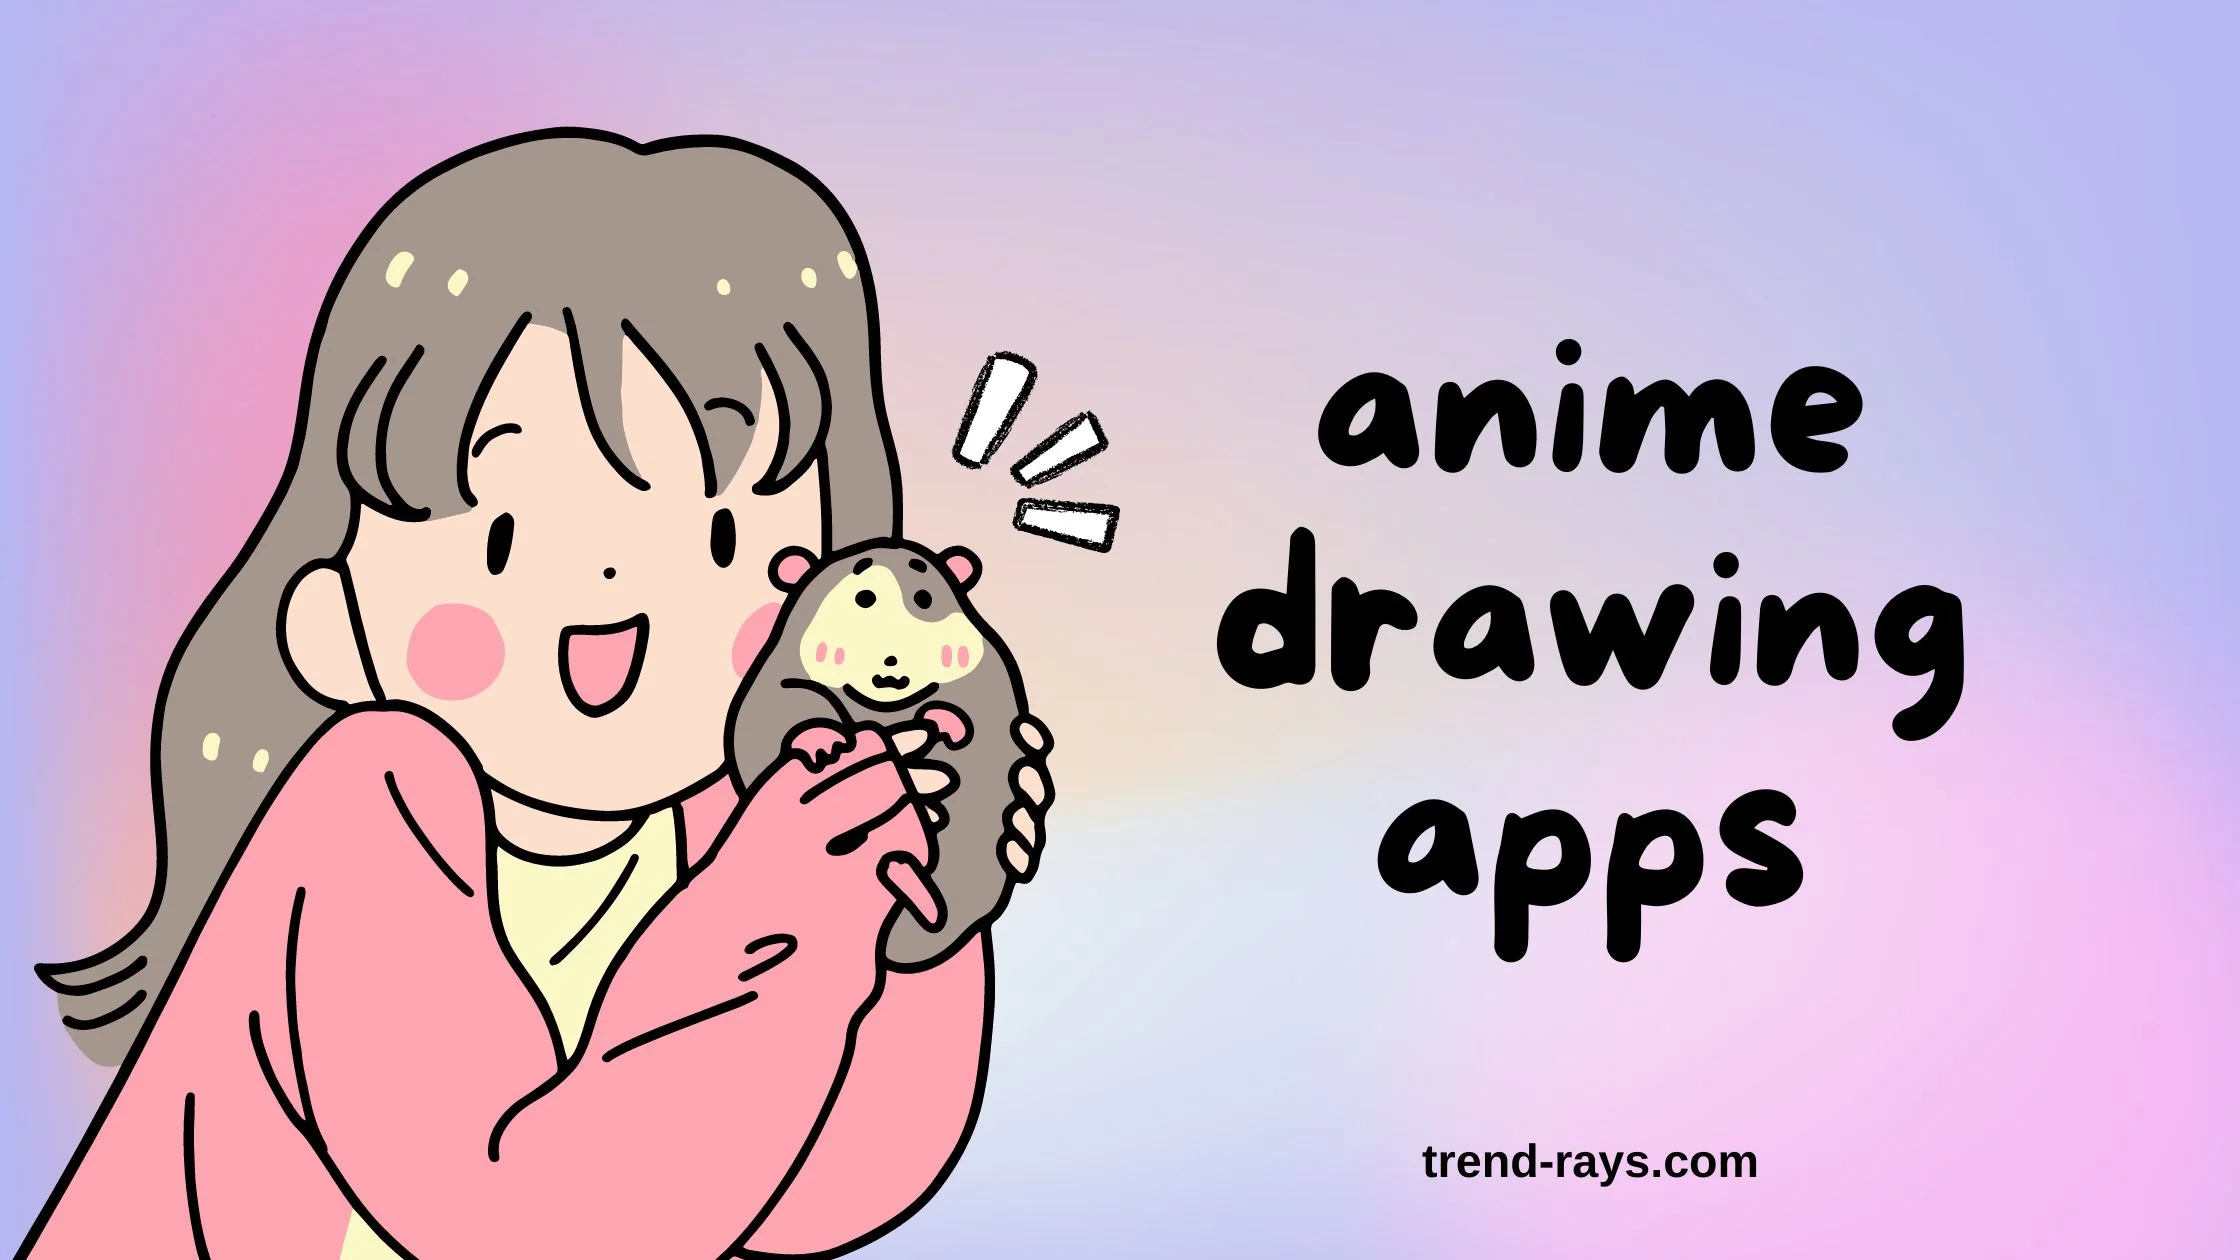 How To Draw Anime Step By Steps Apk Download for Android Latest version  402 comdrawinganimestepbystepsfree